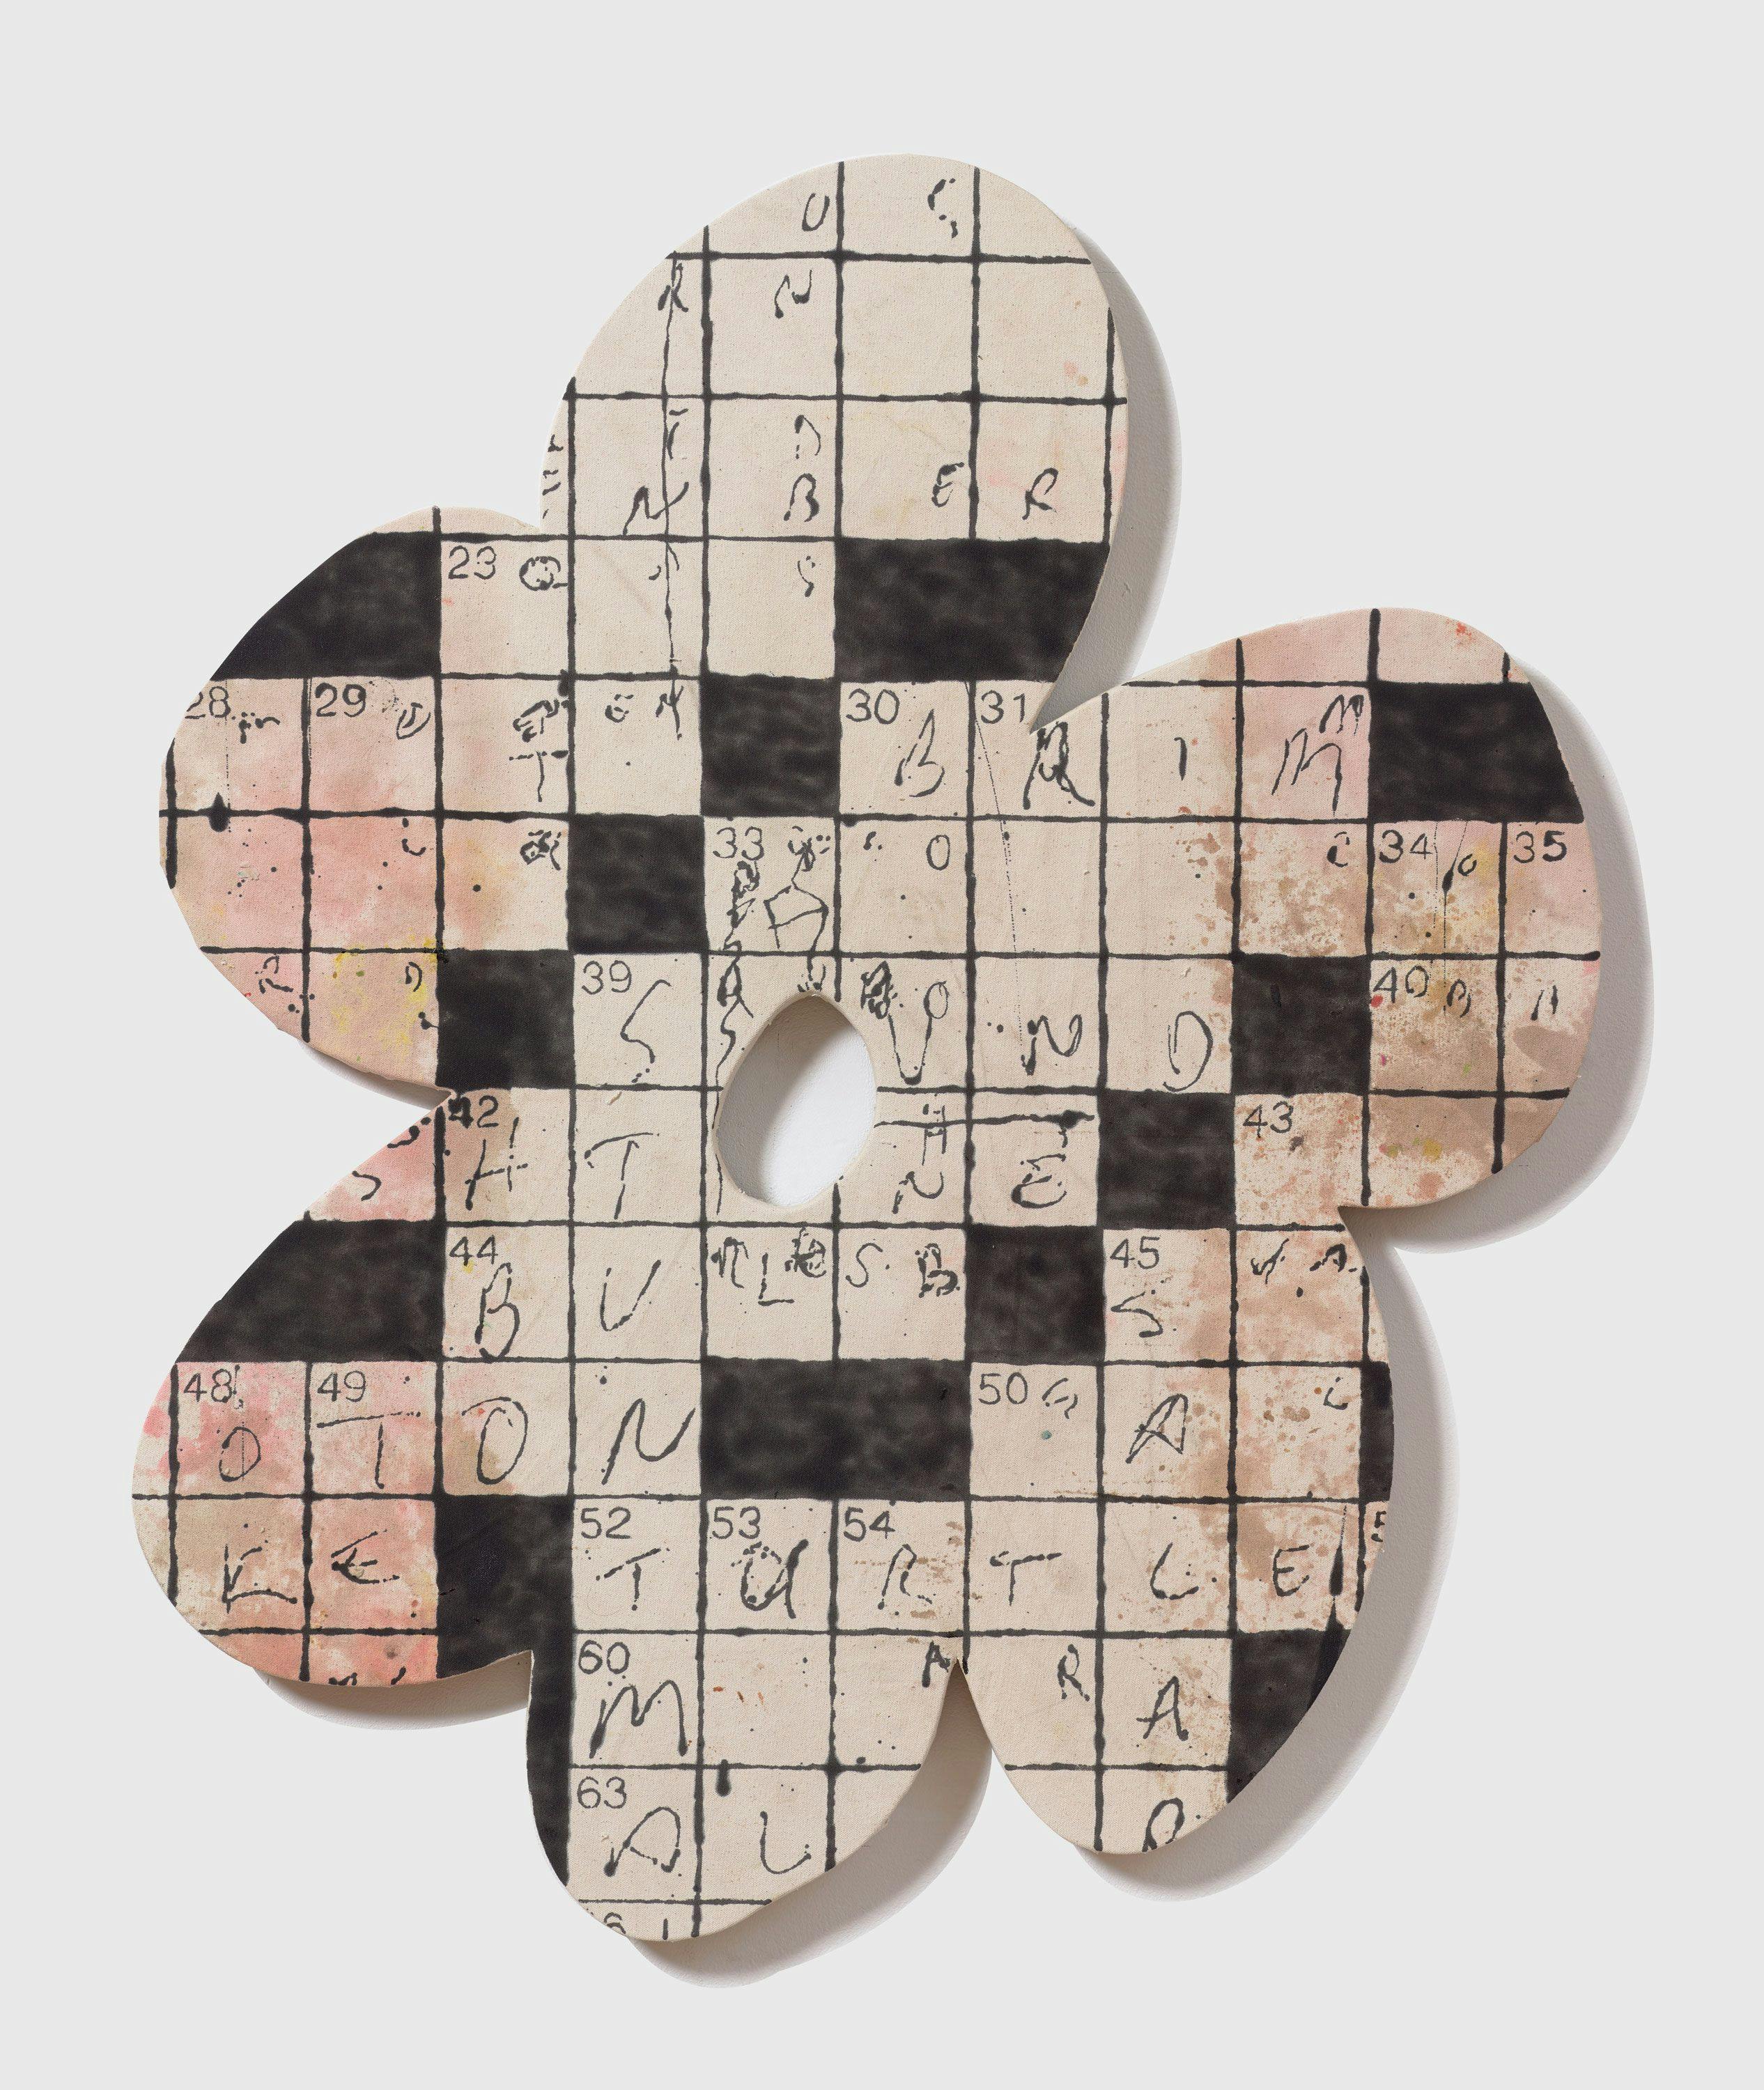 An alkyd, dirt, and sugar on canvas artwork by Nate Lowman, titled Crossword Flower, dated 2015.